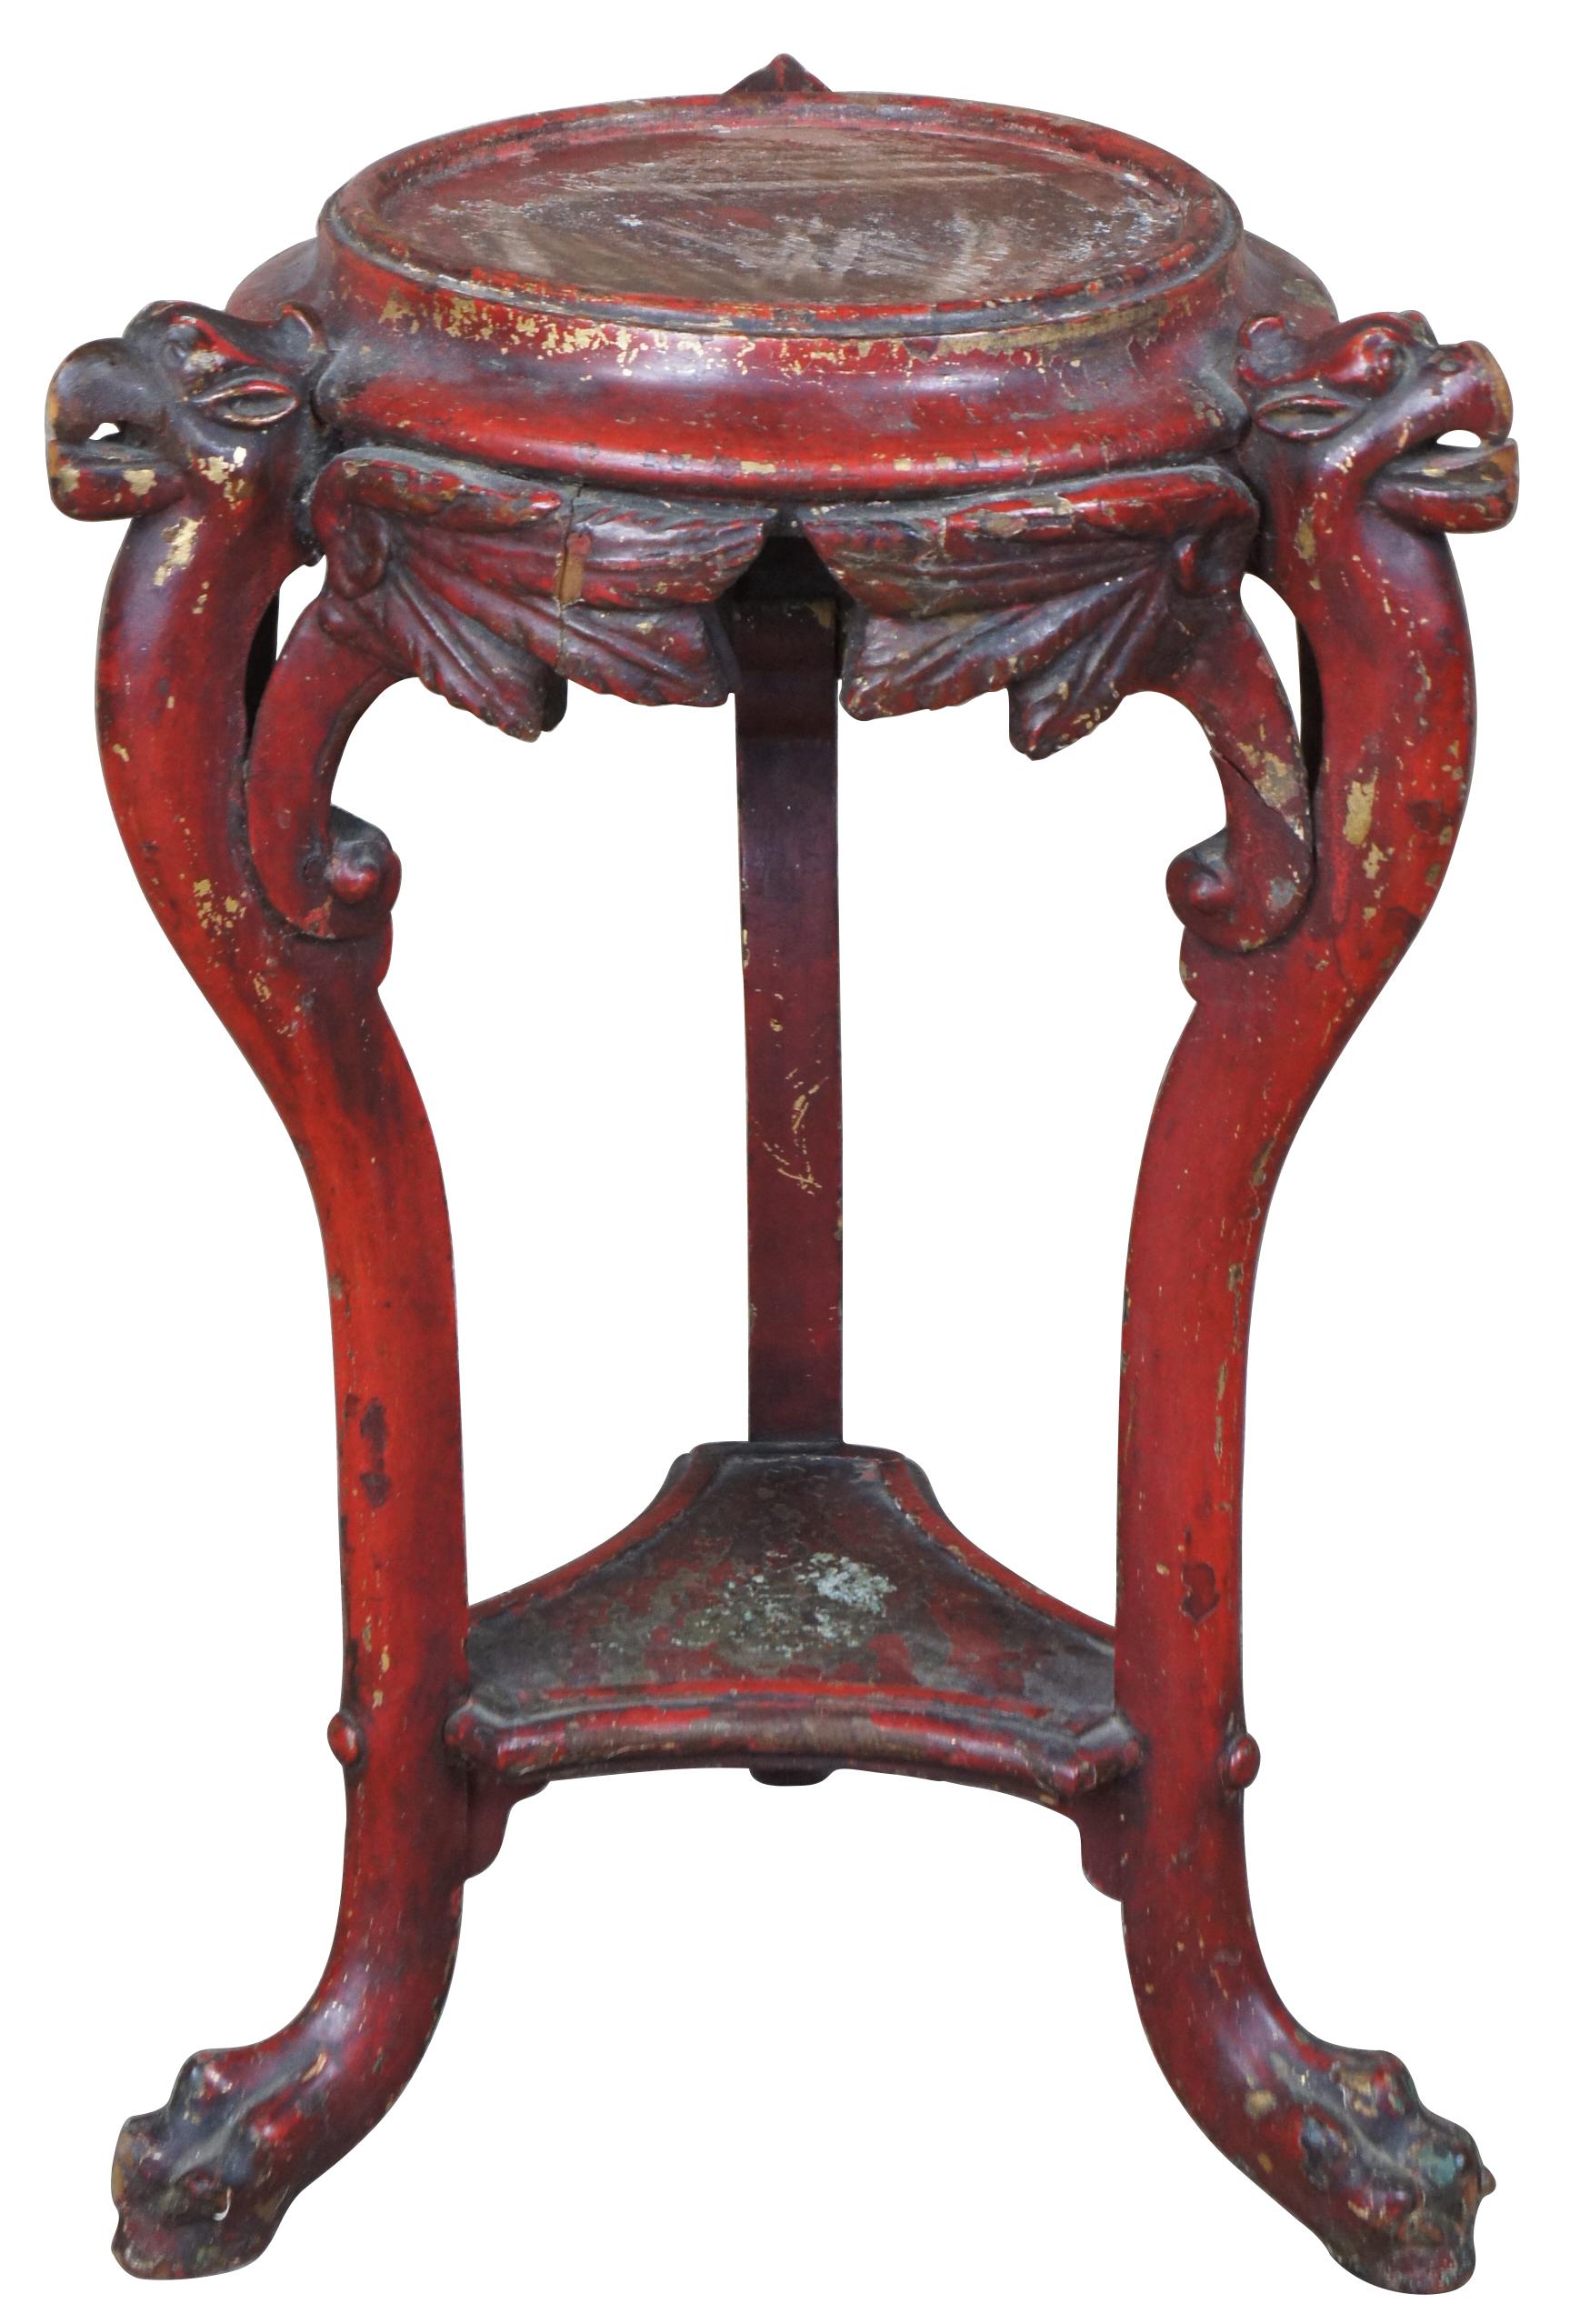 Antique red painted figural winged animal table. Features a Griffin (Gryphon, Griffon), eagle or dragon figure carved out of wood and painted red over gold. A two-tier design with ornate detail and paw feet.
  